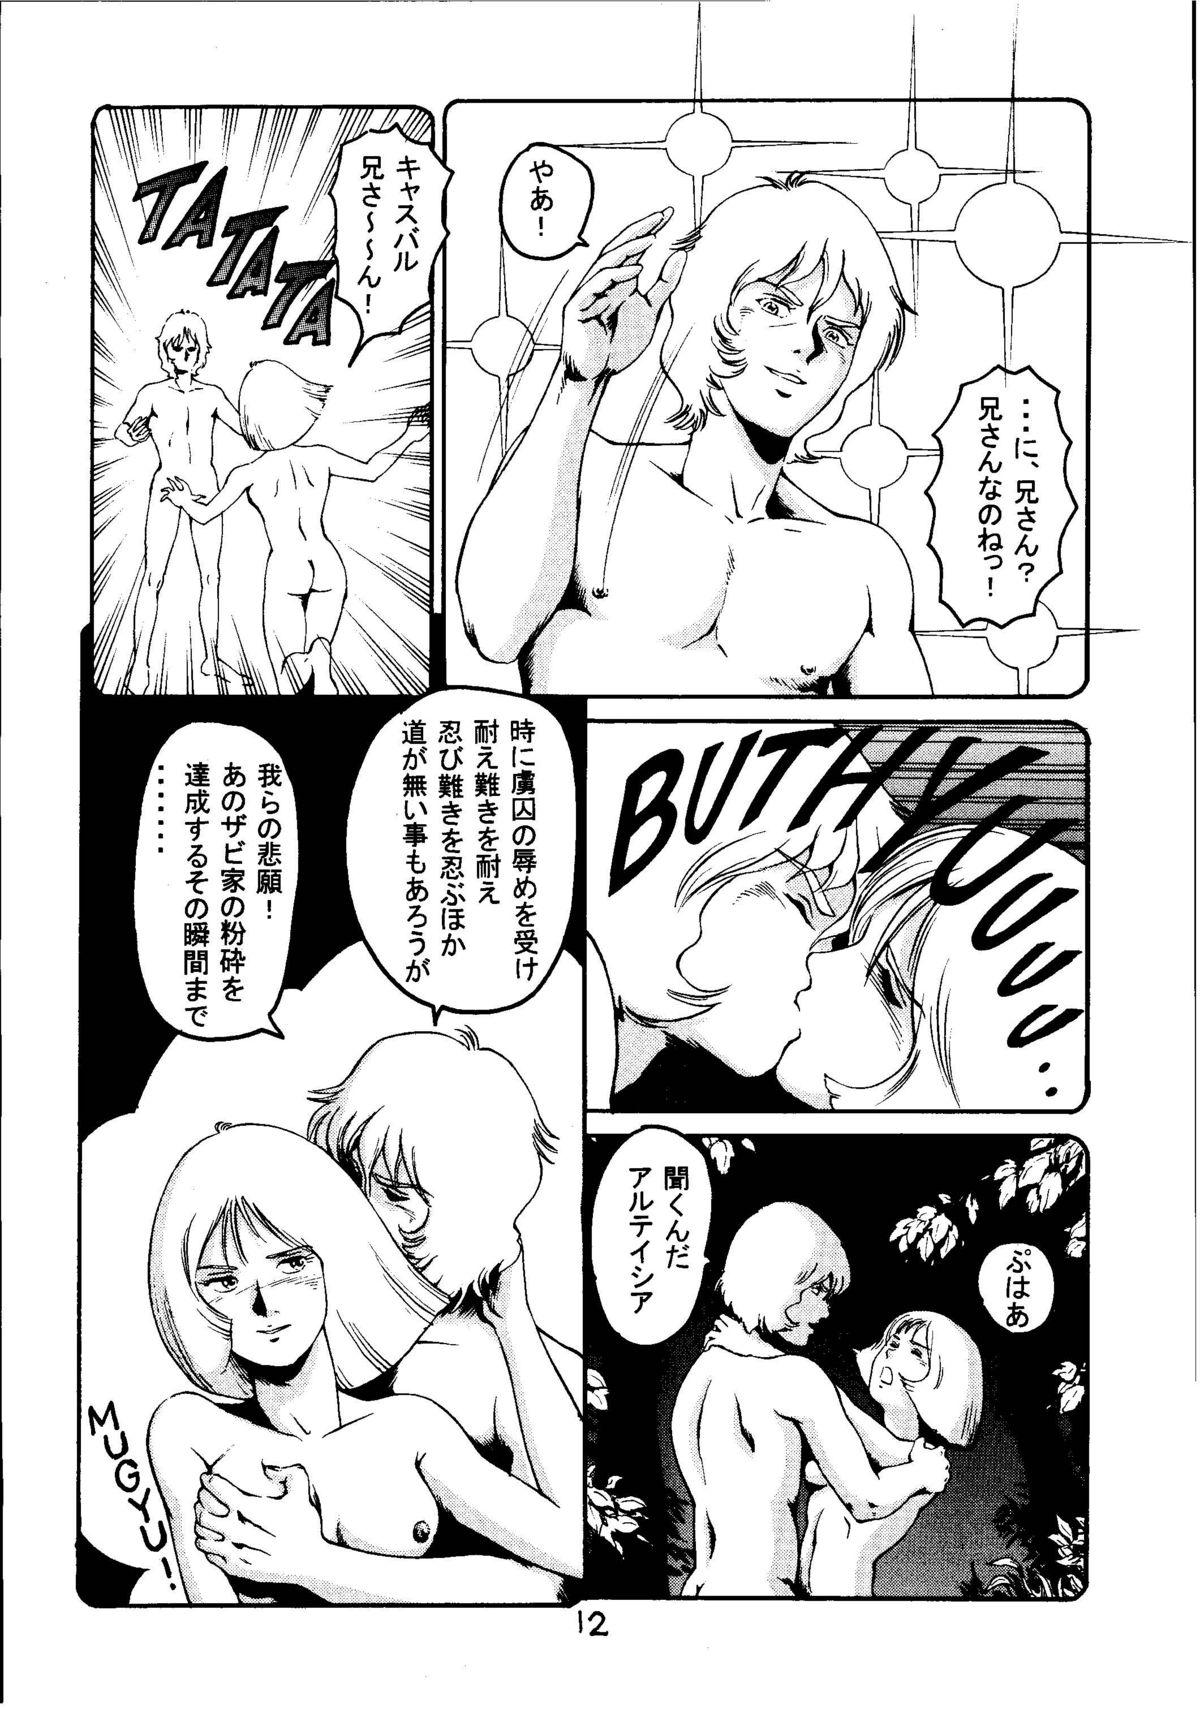 Soapy Kin Hair kaitei ban - Mobile suit gundam Private Sex - Page 11